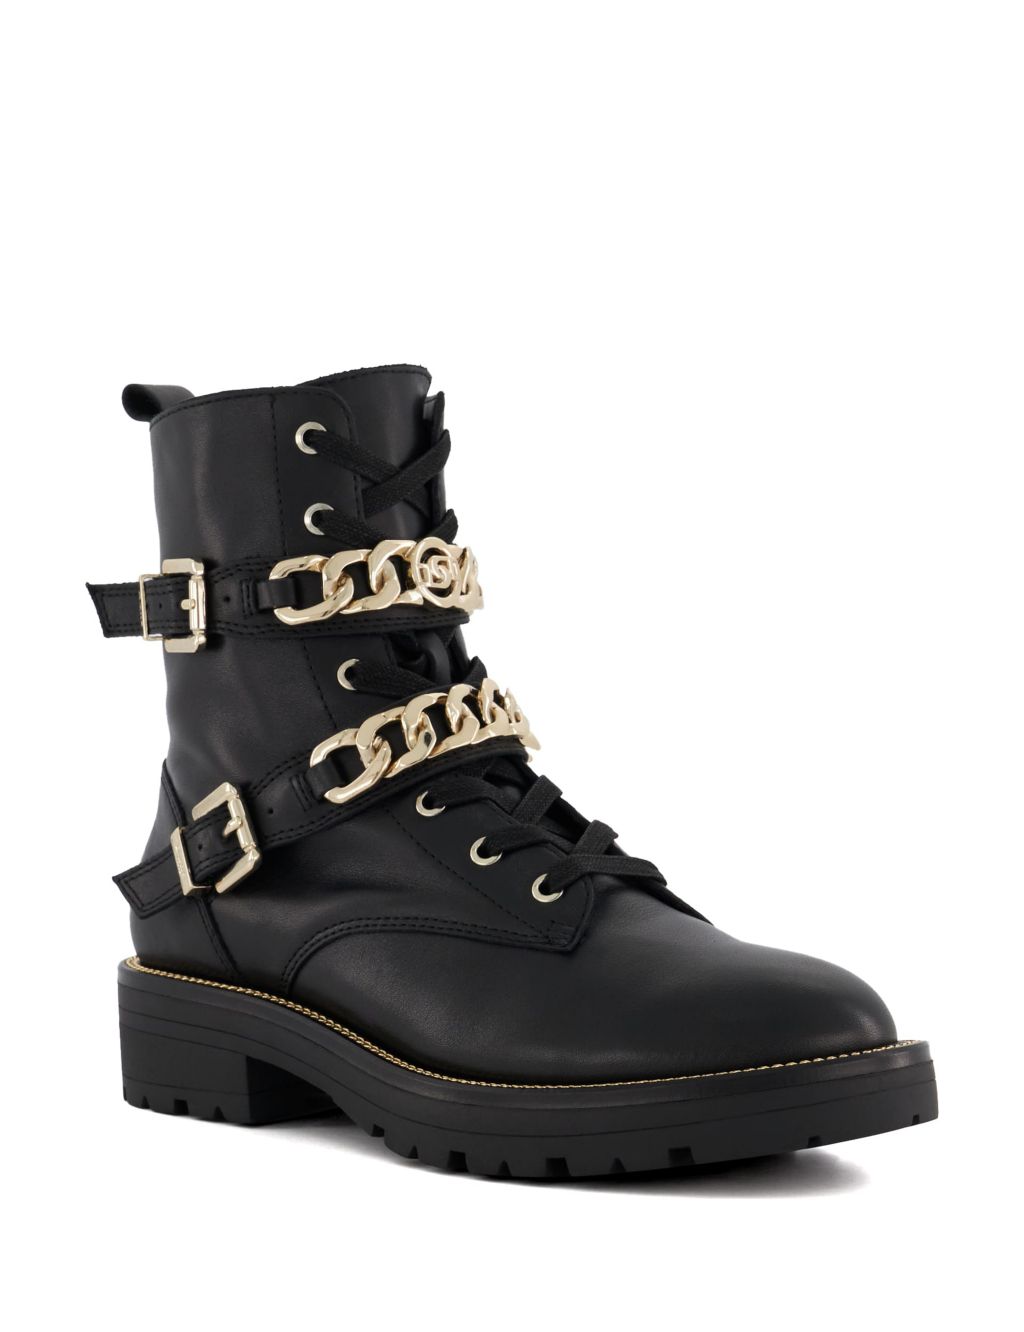 Leather Biker Lace Up Flat Ankle Boots image 2